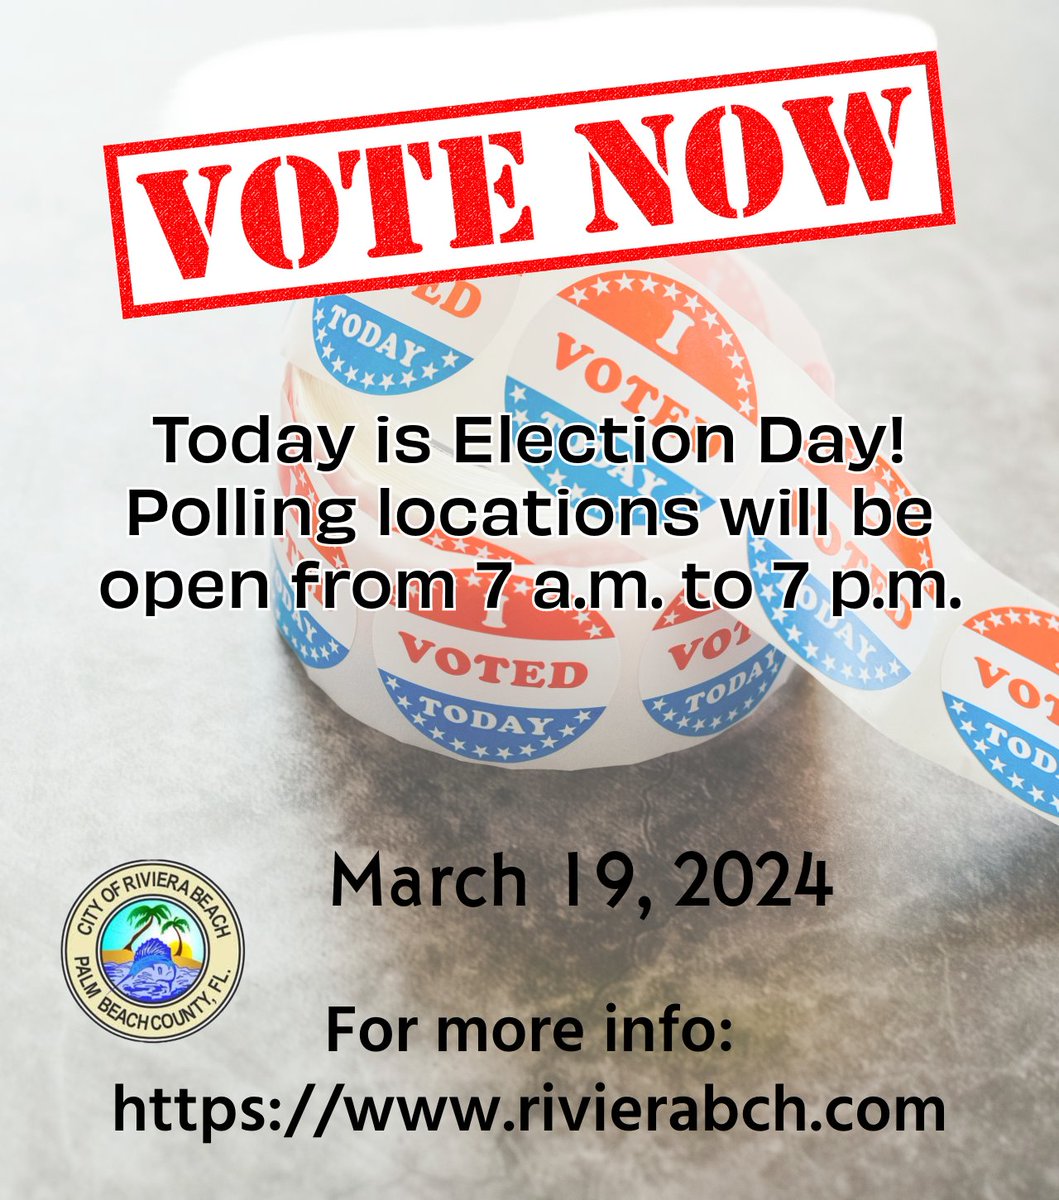 🗳️ It's Election Day in Riviera Beach! Exercise your right to vote and make your voice heard before 7 p.m. at your precinct. Check out Riviera Beach's website for more info: rivierabch.com #ElectionDay #VoteNow